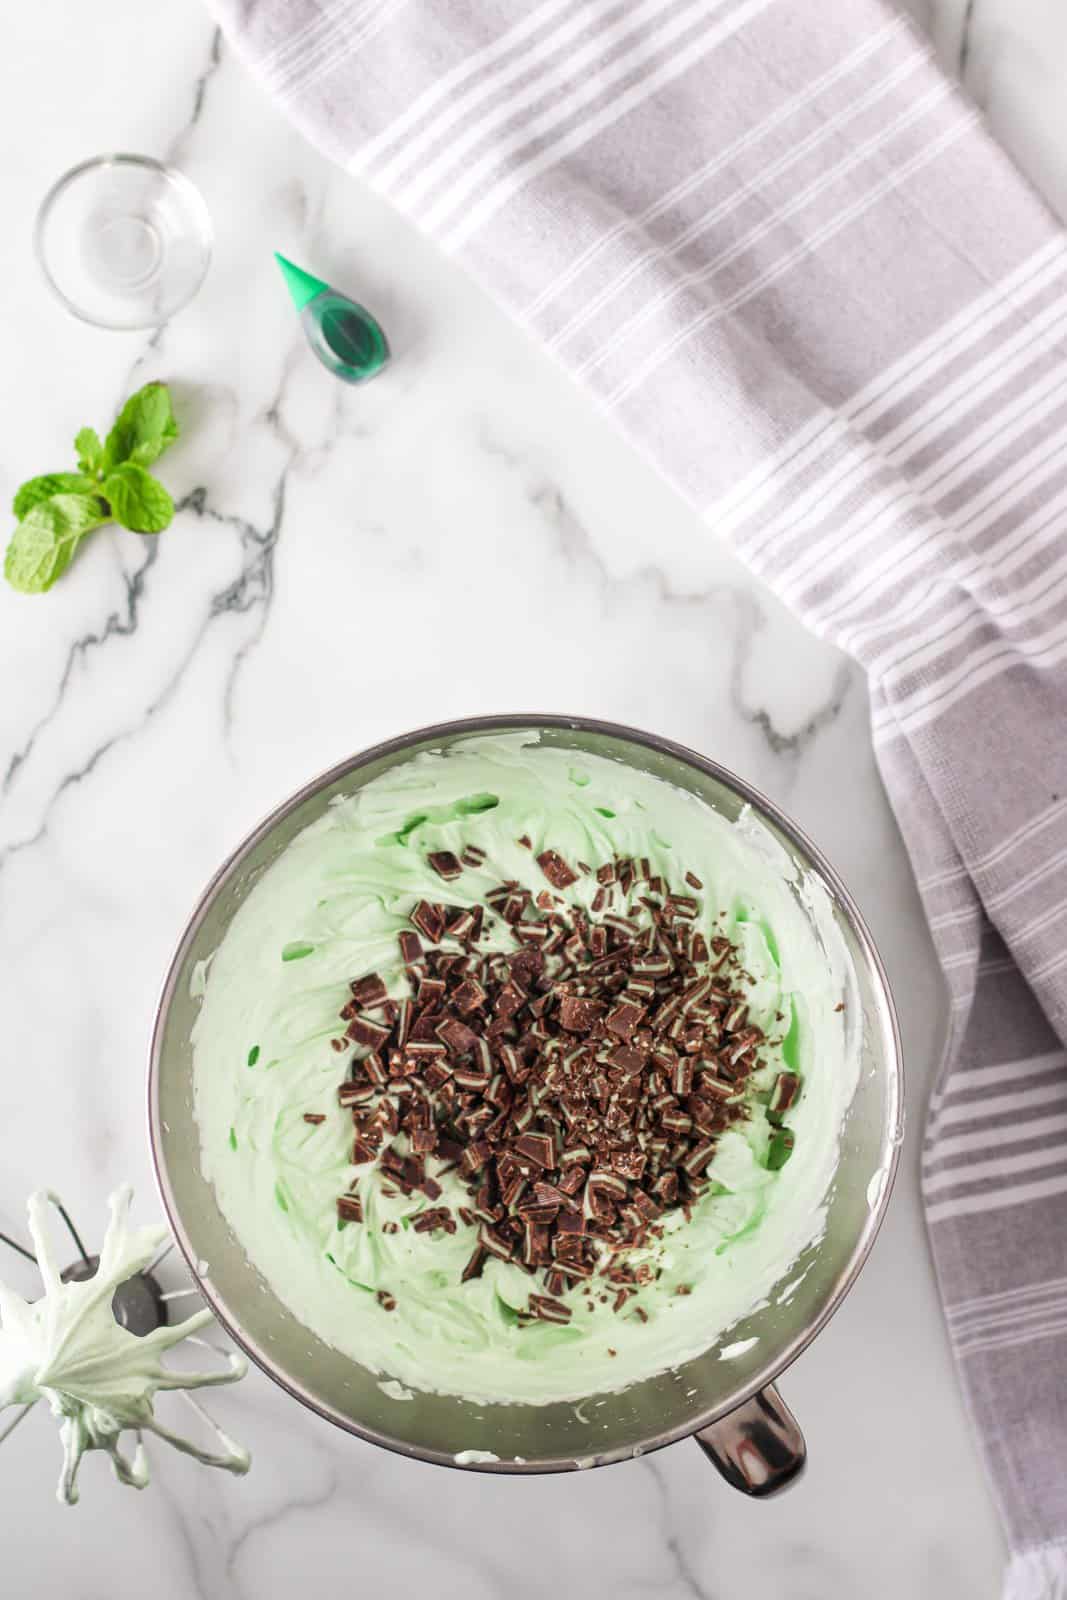 Mint chocolate added to ice cream mixer in bowl of stand mixer.